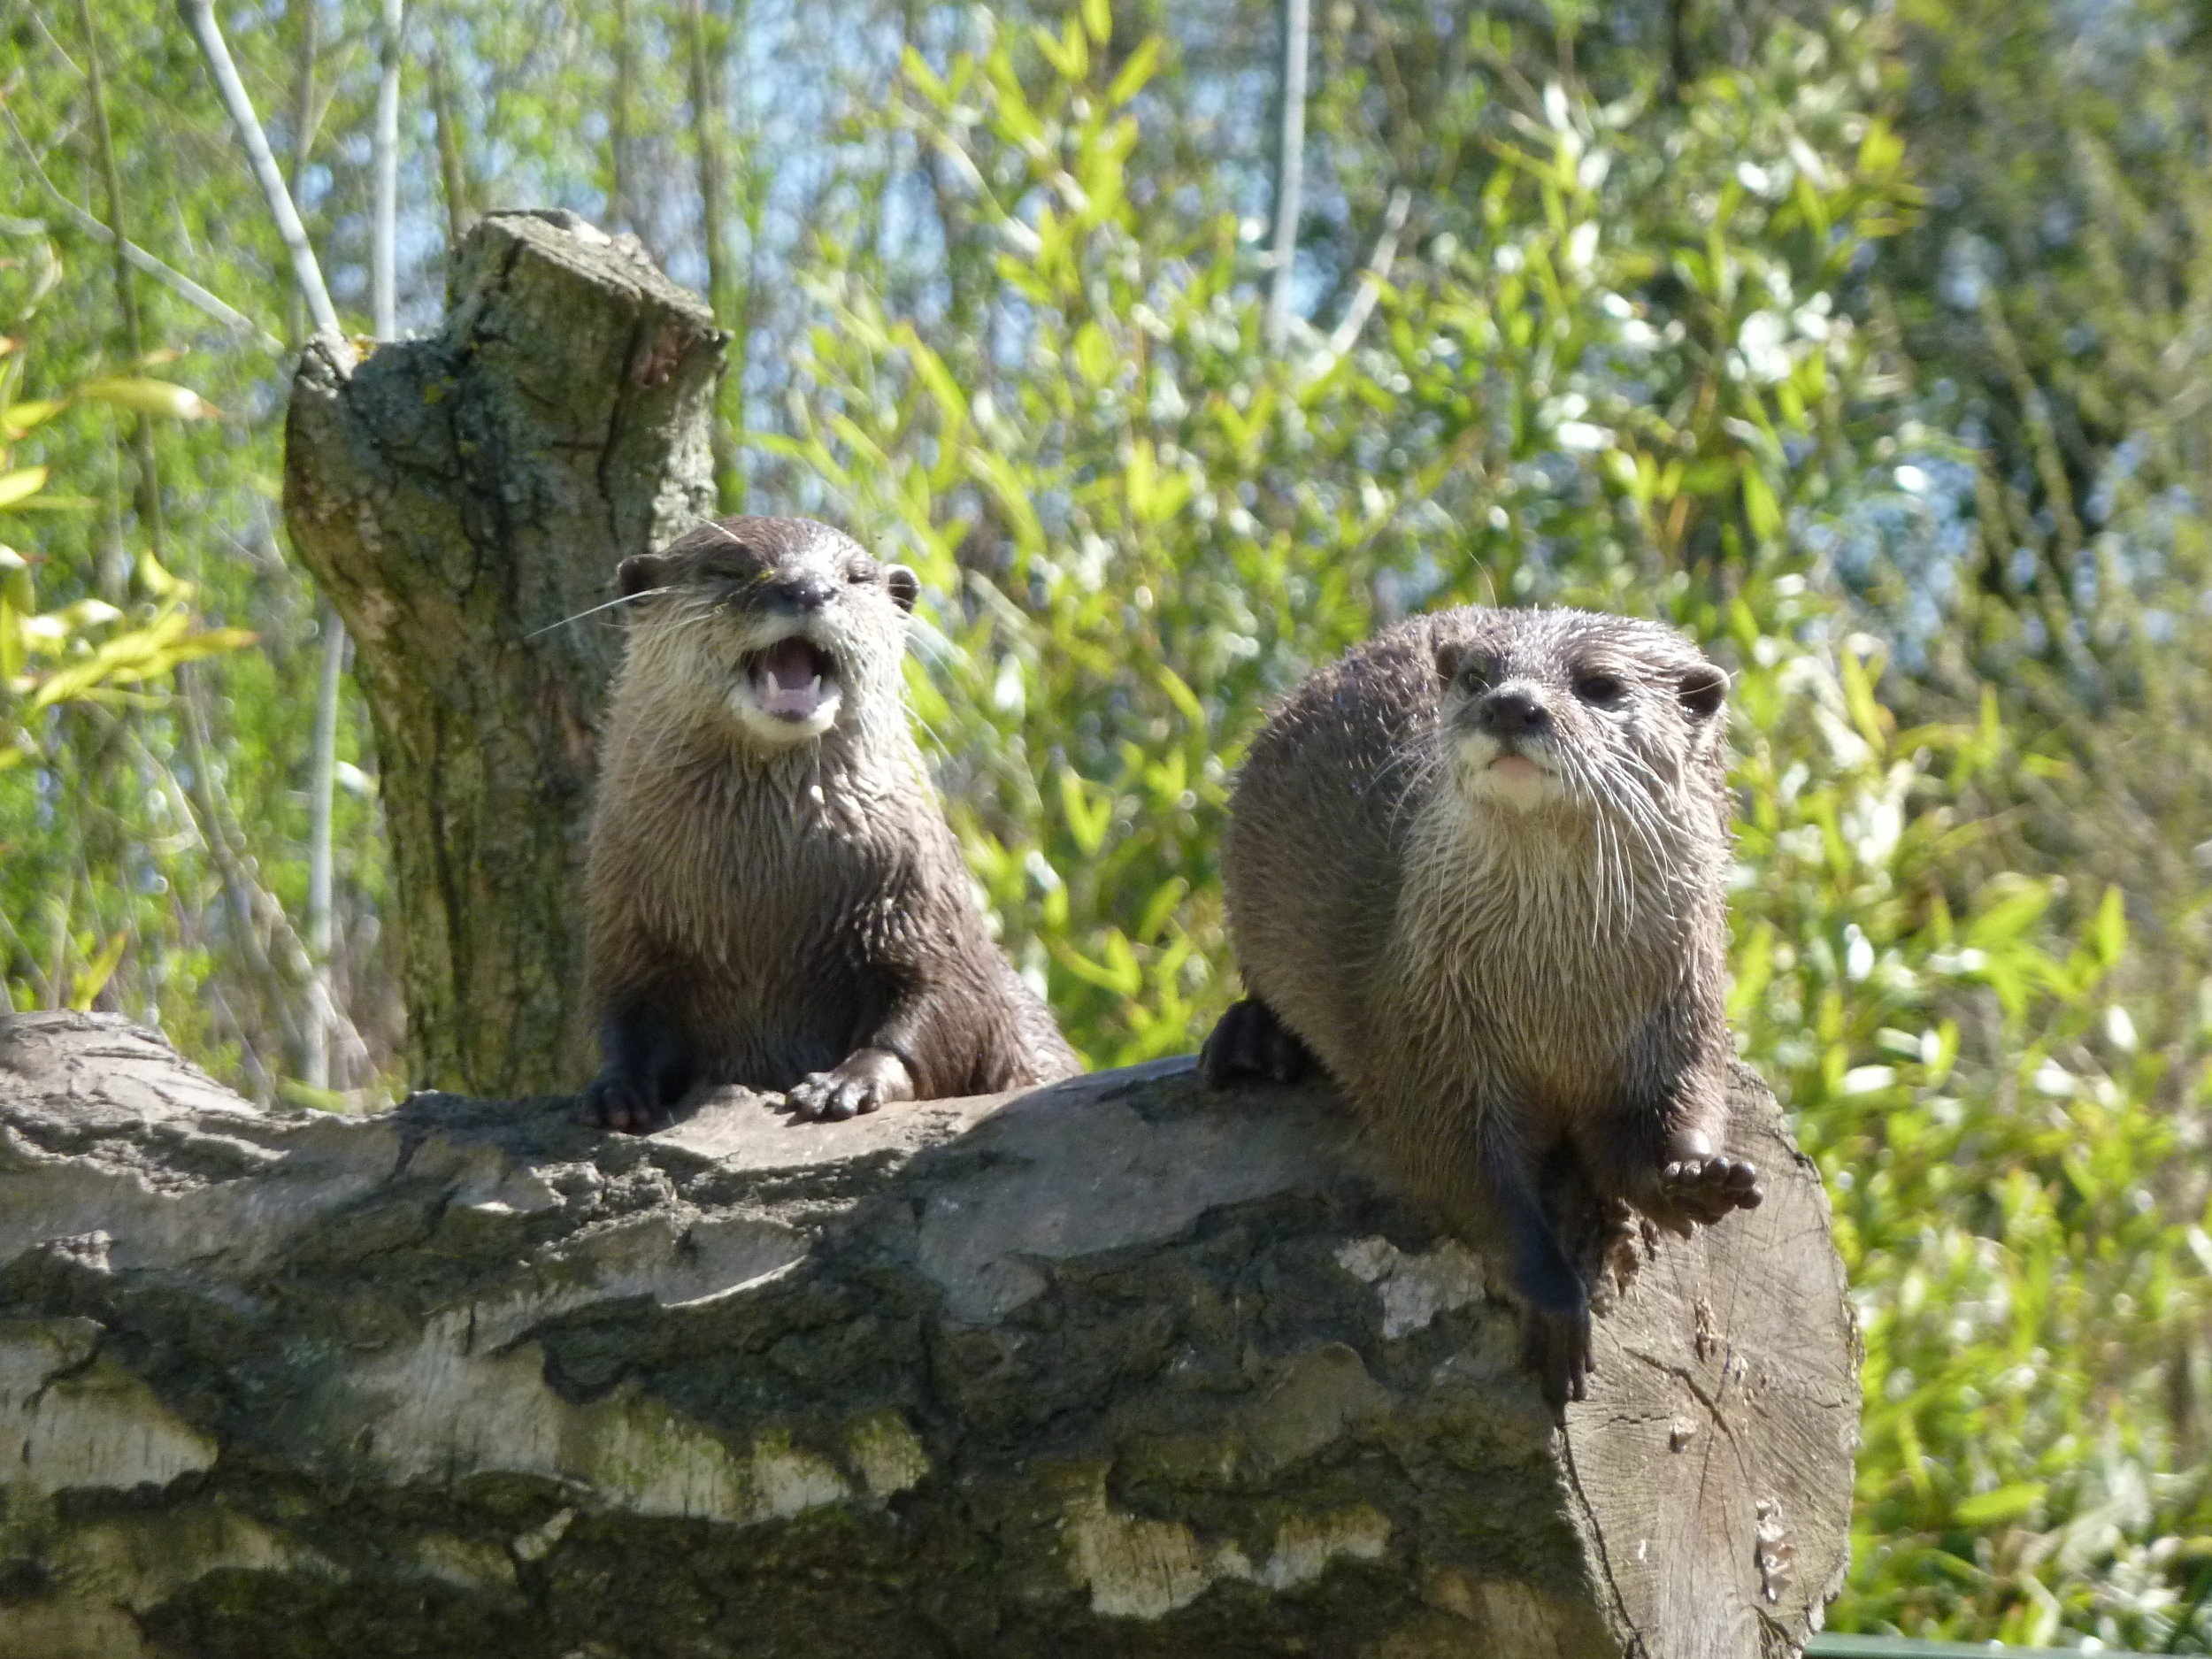 One Otter Sings While the Other Plays the Log Bongo